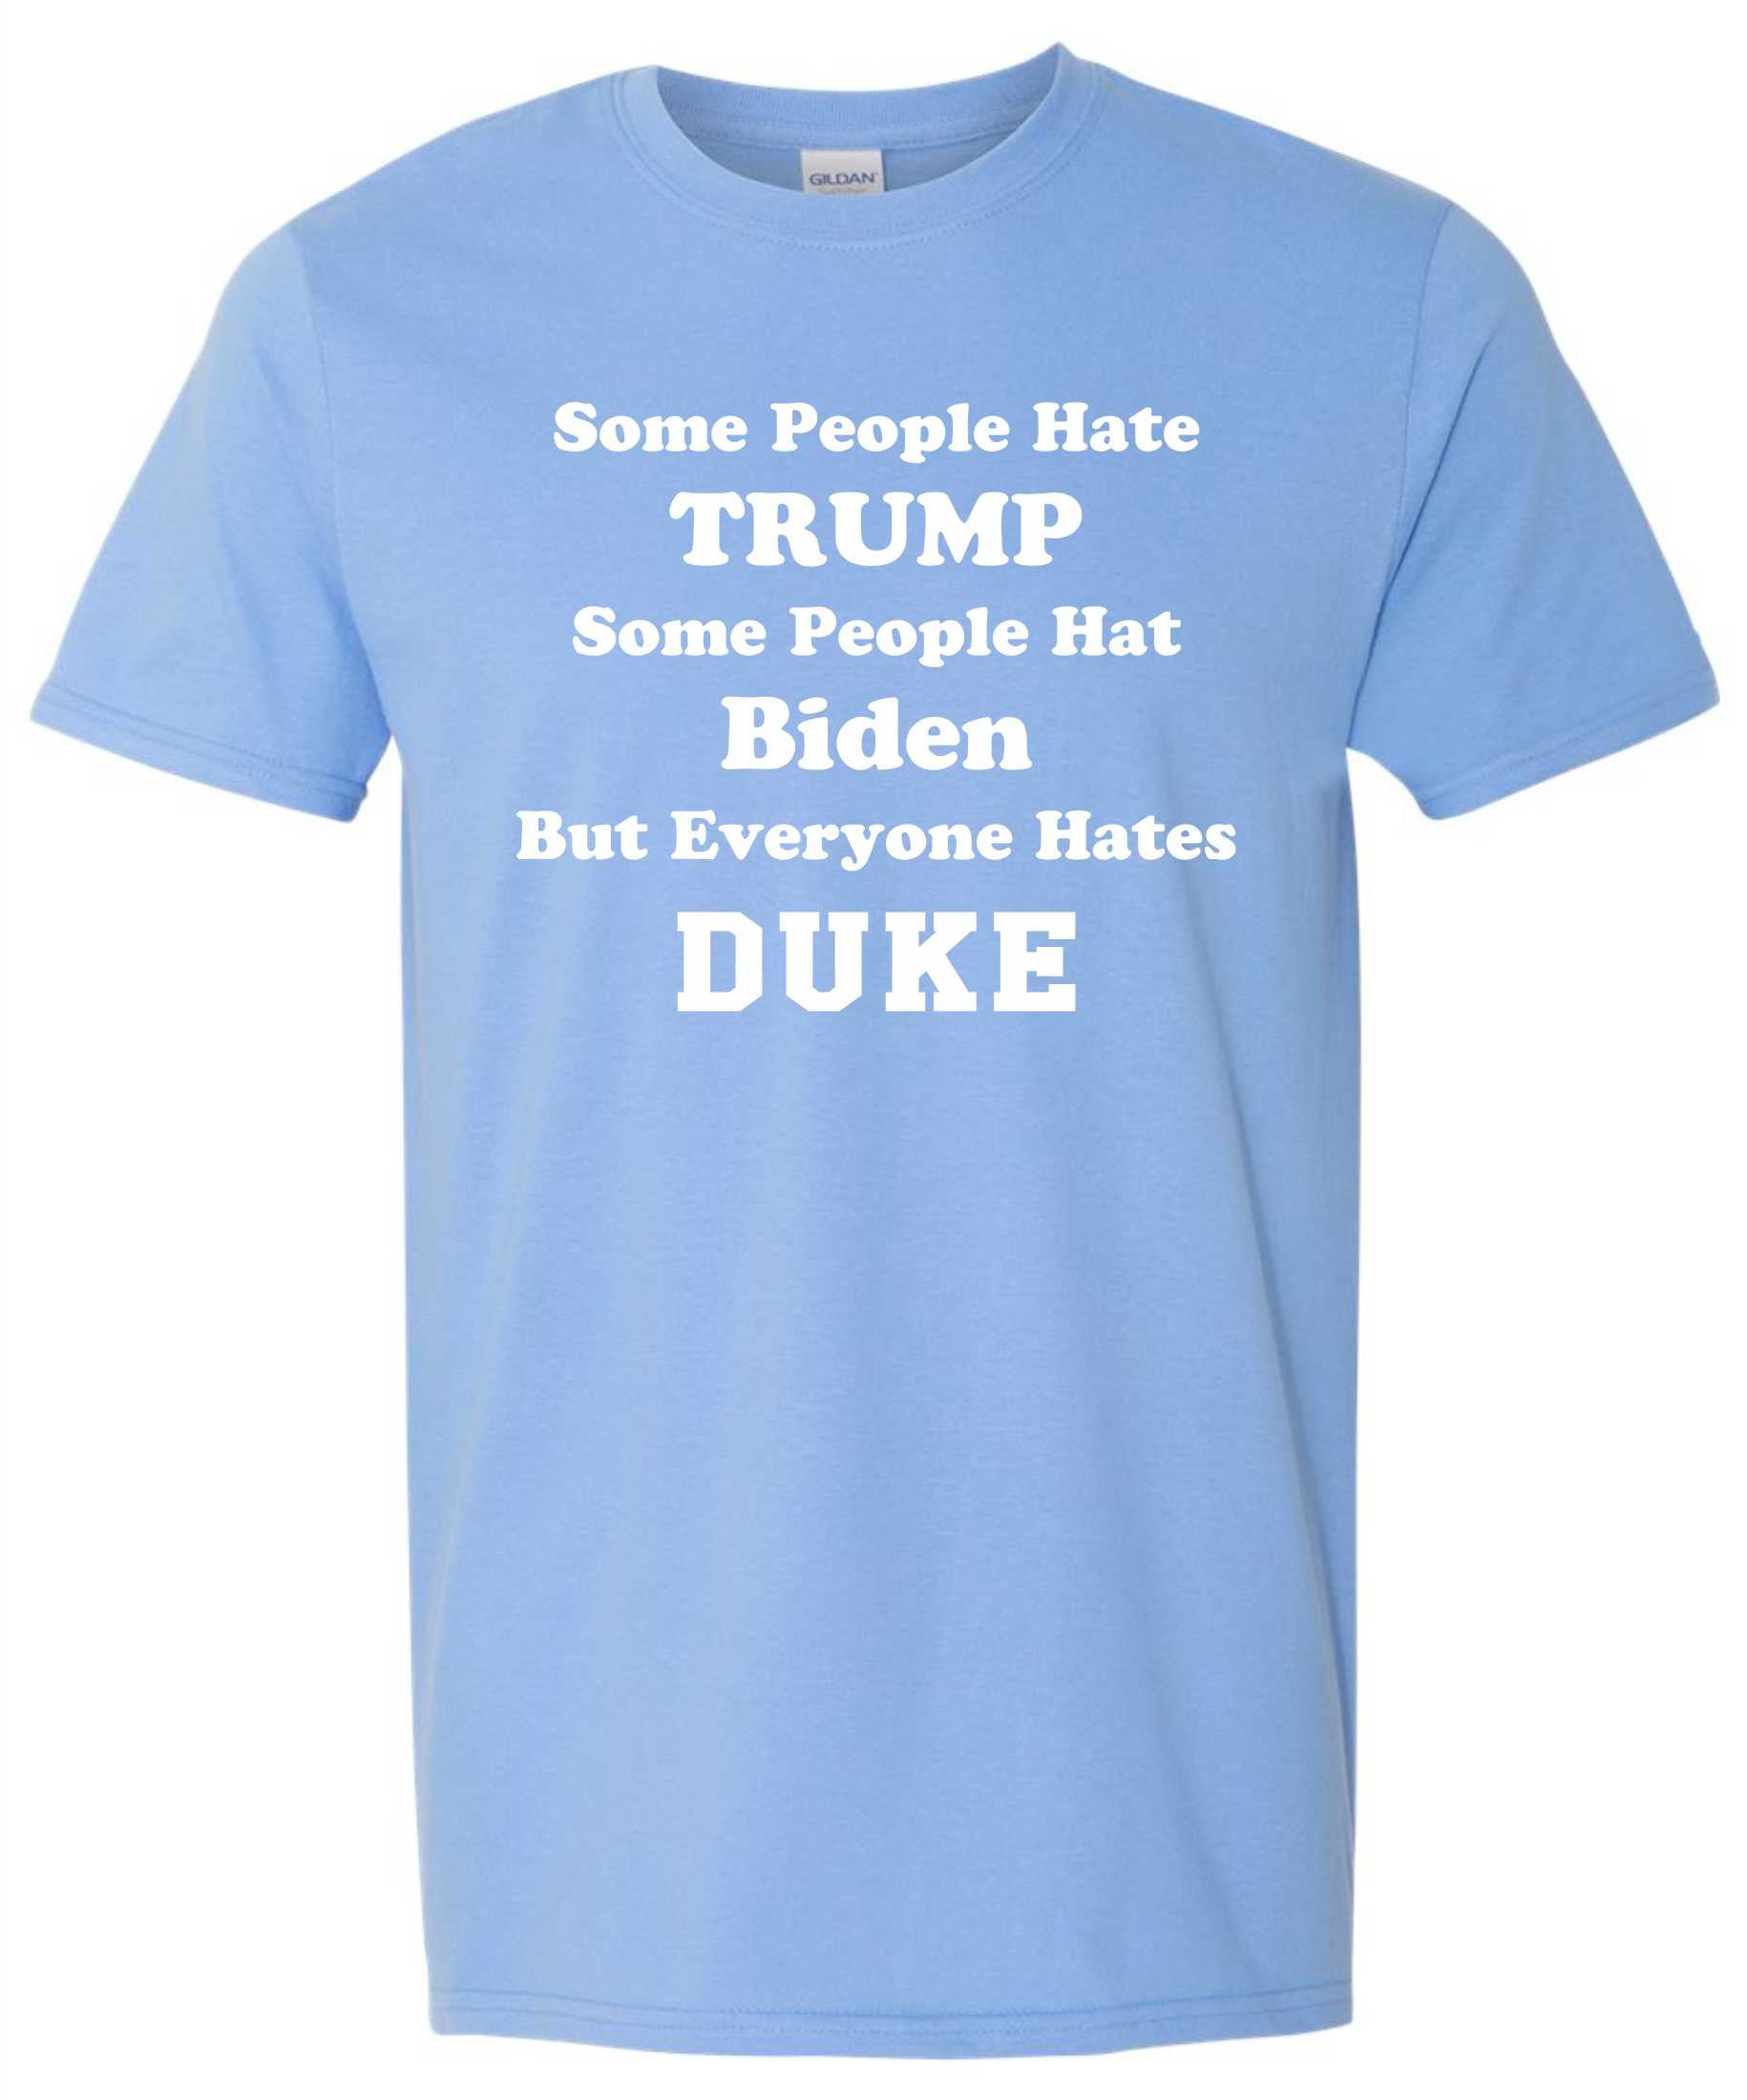 Some people Hate Trump, Some people Hate Biden T-Shirt